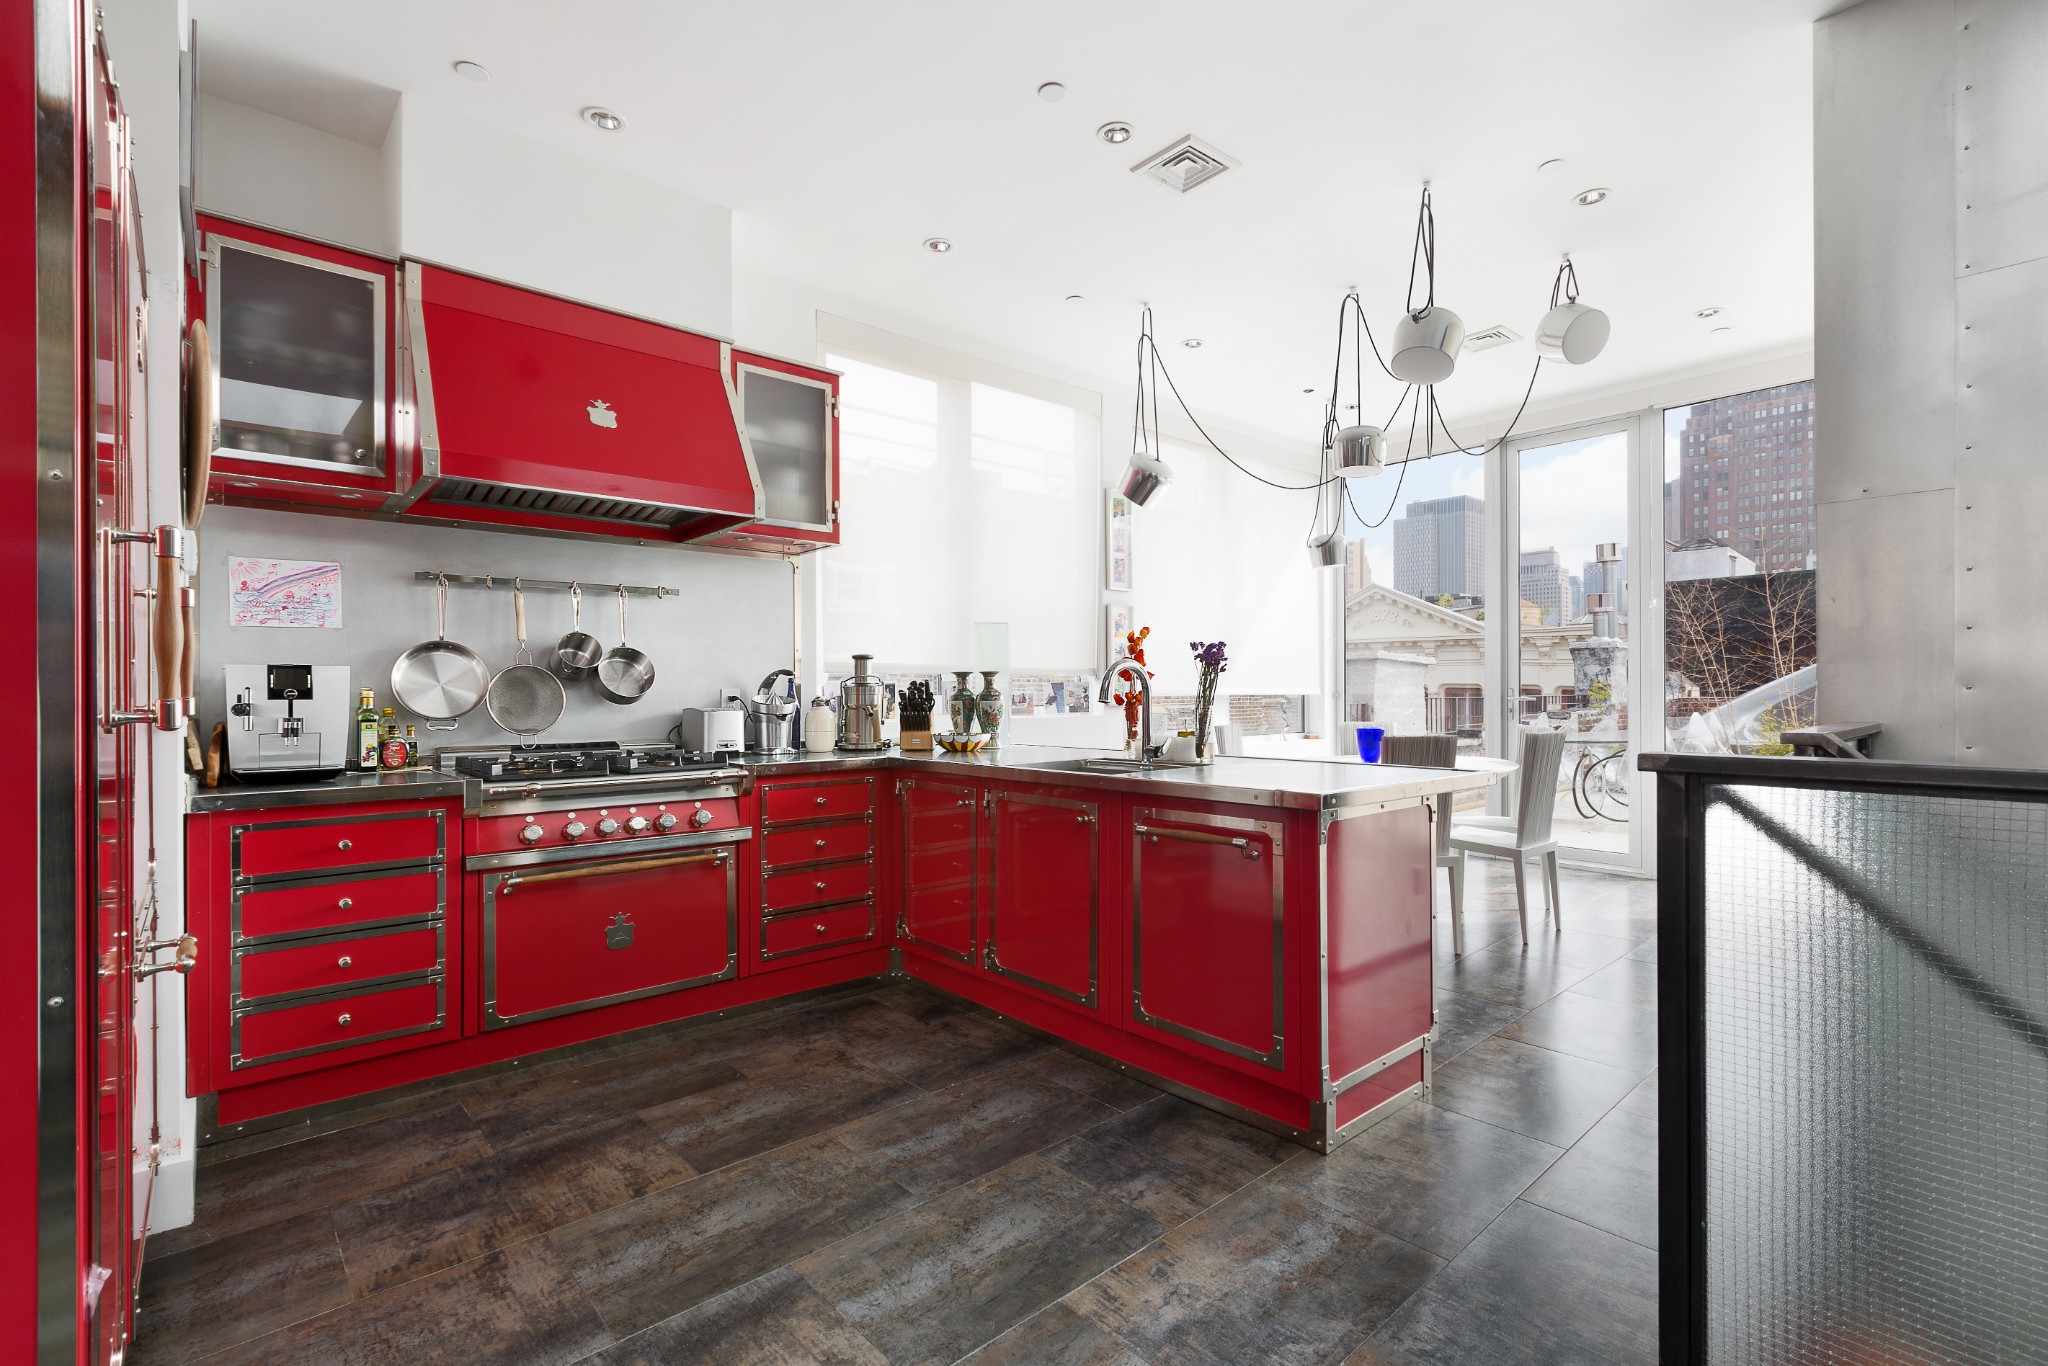 498 Broome Street Ph, Soho, Downtown, NYC - 3 Bedrooms  
3 Bathrooms  
7 Rooms - 